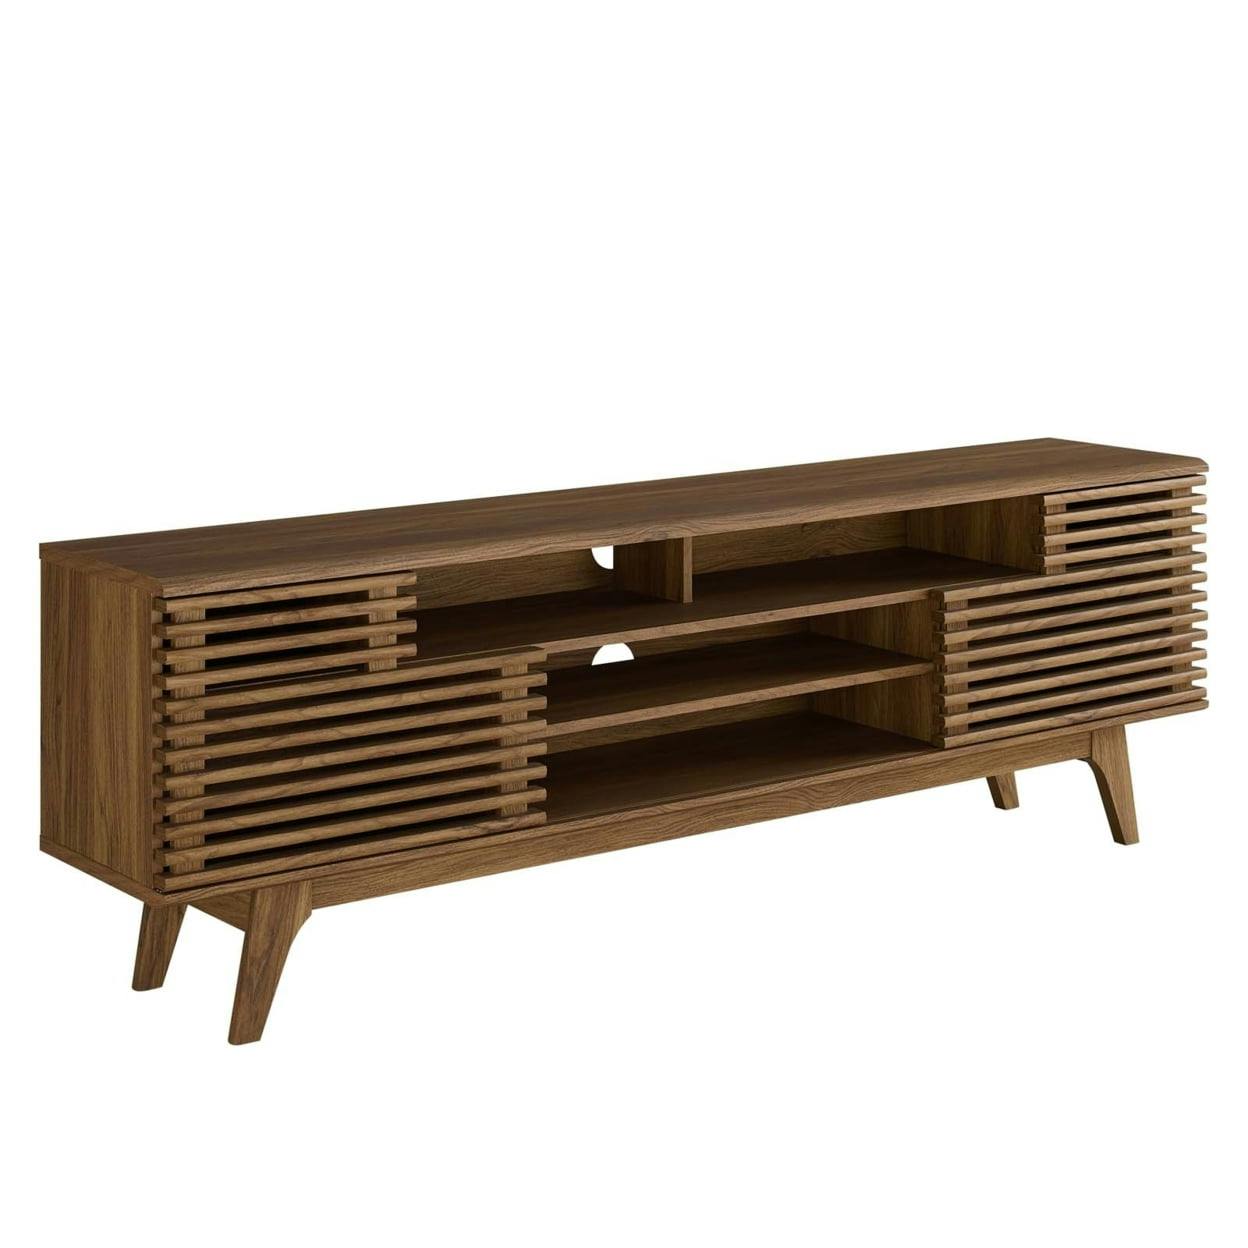 Mid-Century Walnut Media Console with Sliding Doors and Cable Management